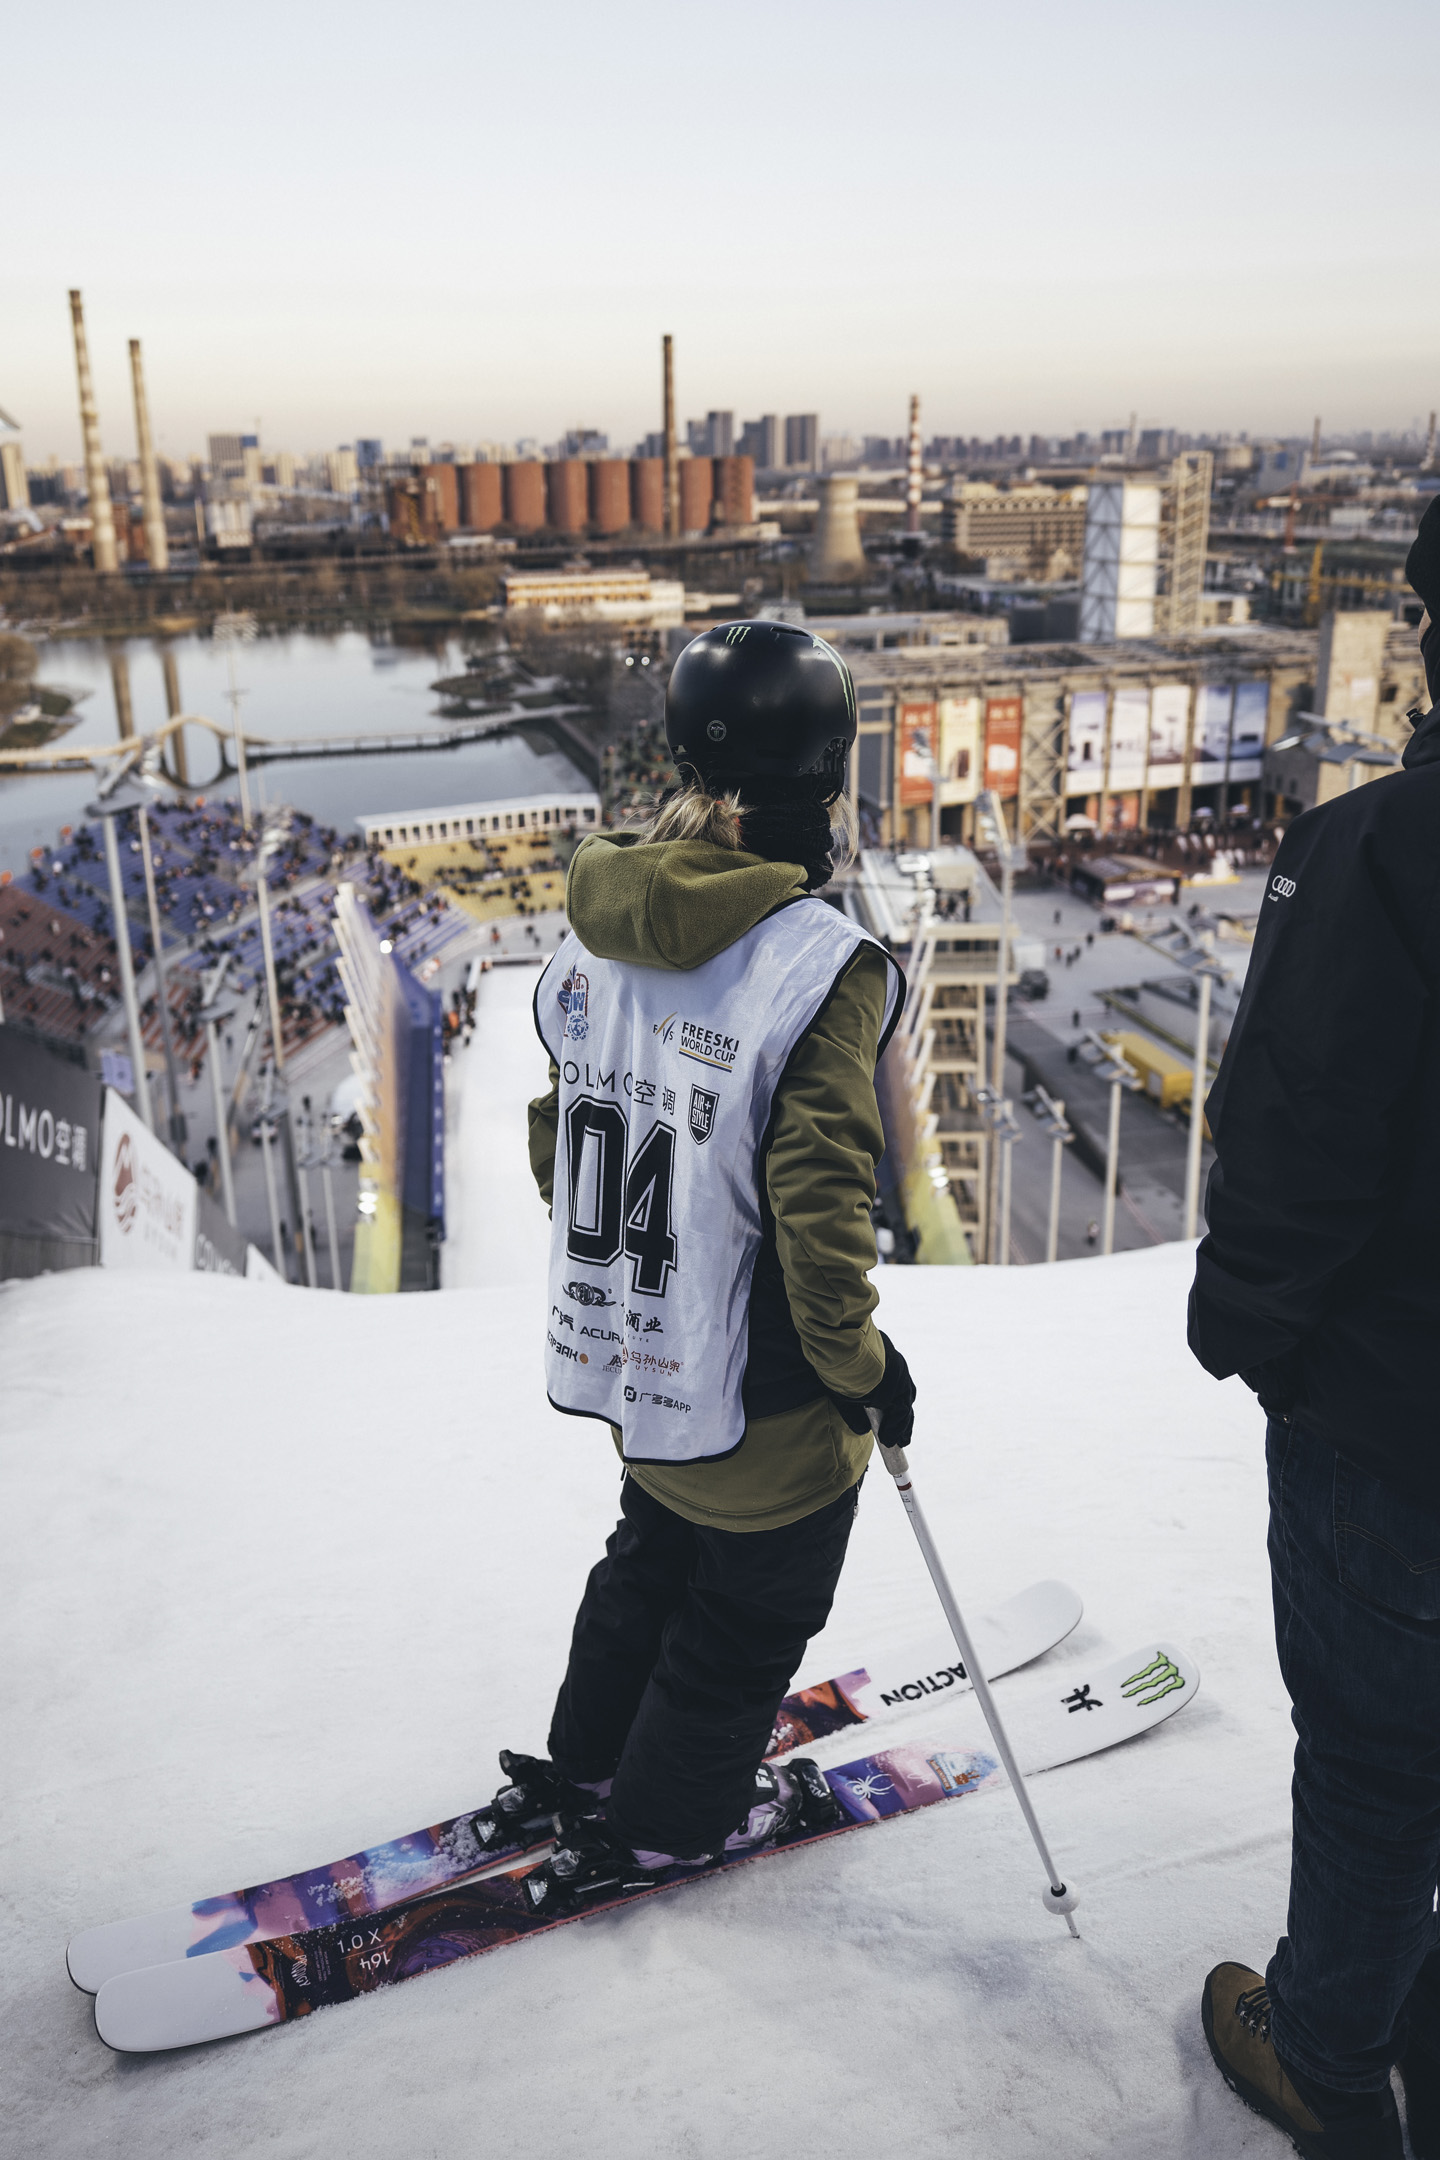 Monster Energy's Giulia Tanno Takes Second in Women's Ski Big Air at Air + Style Beijing 2019